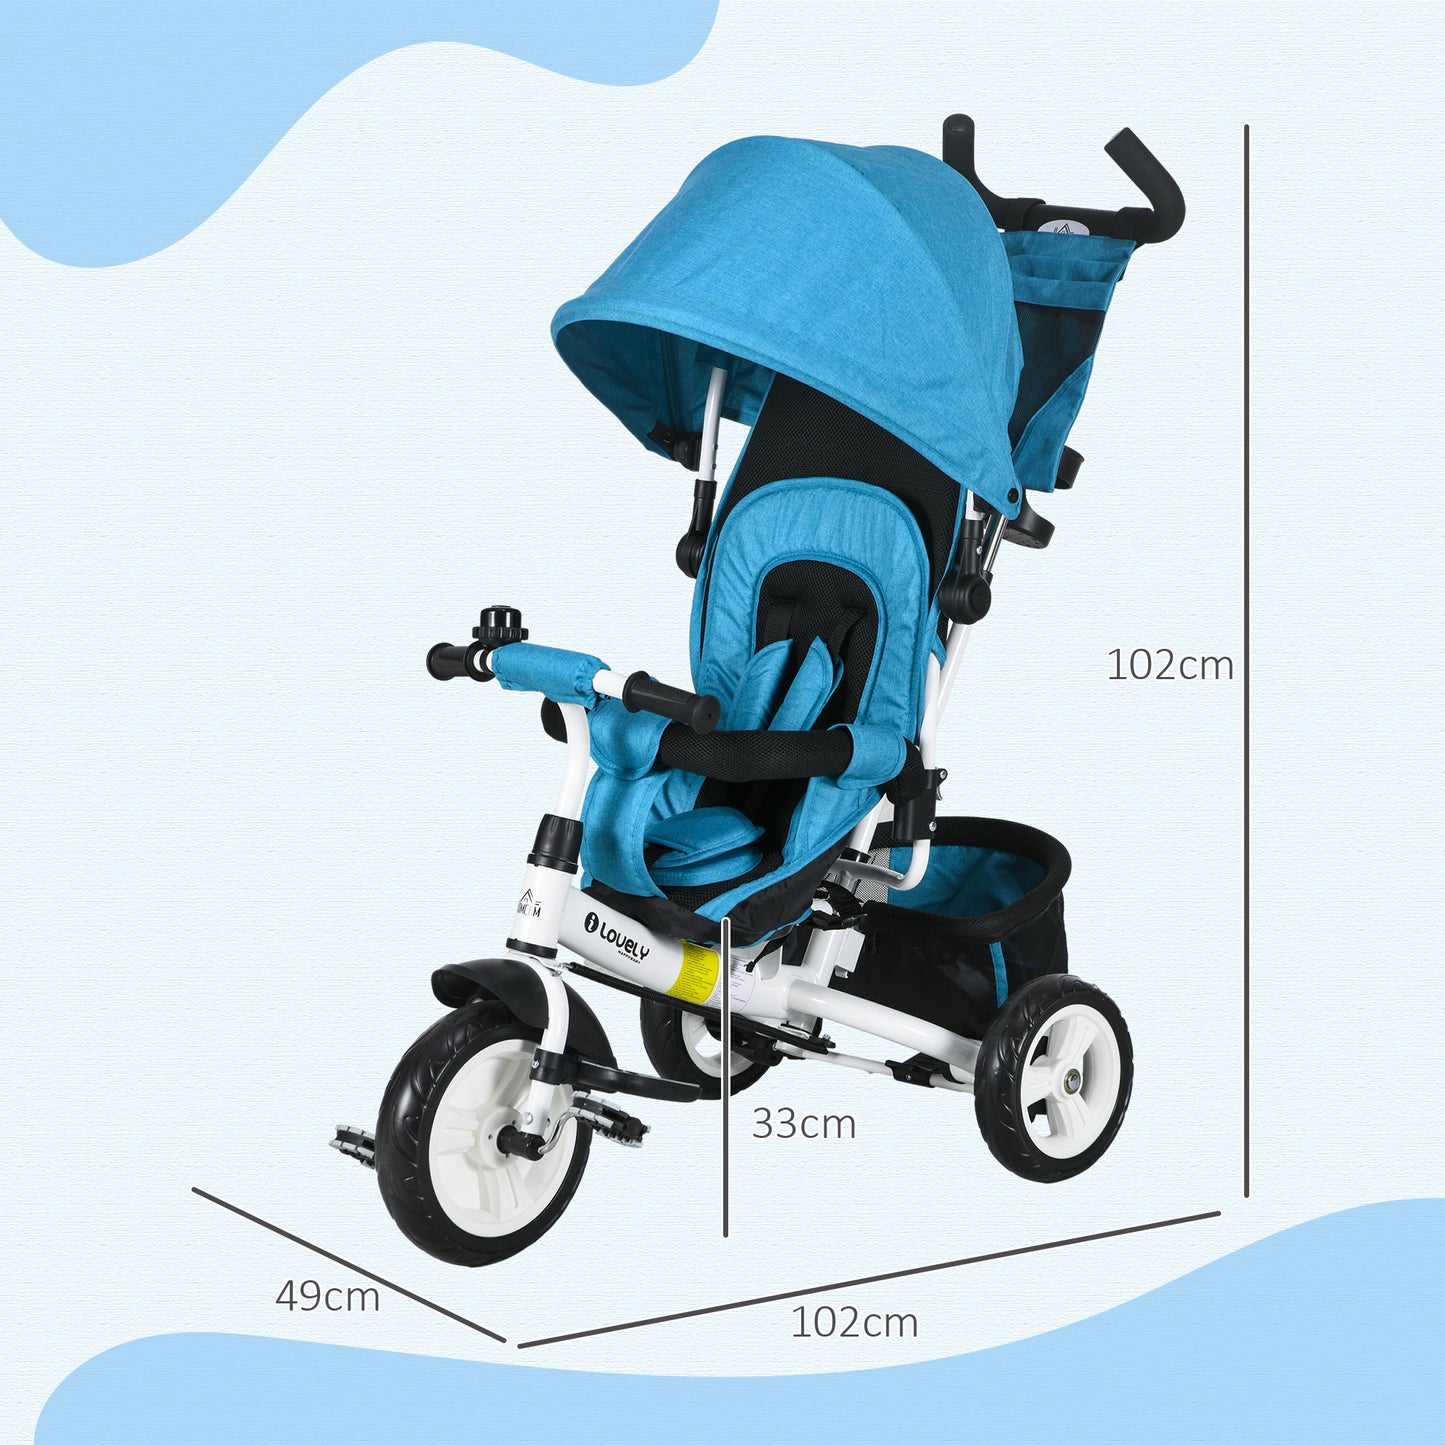 HOMCOM 4 in 1 Kids Trike Push Bike w/ Push Handle 5-point Safety Belt for 1-5 Year olds Blue